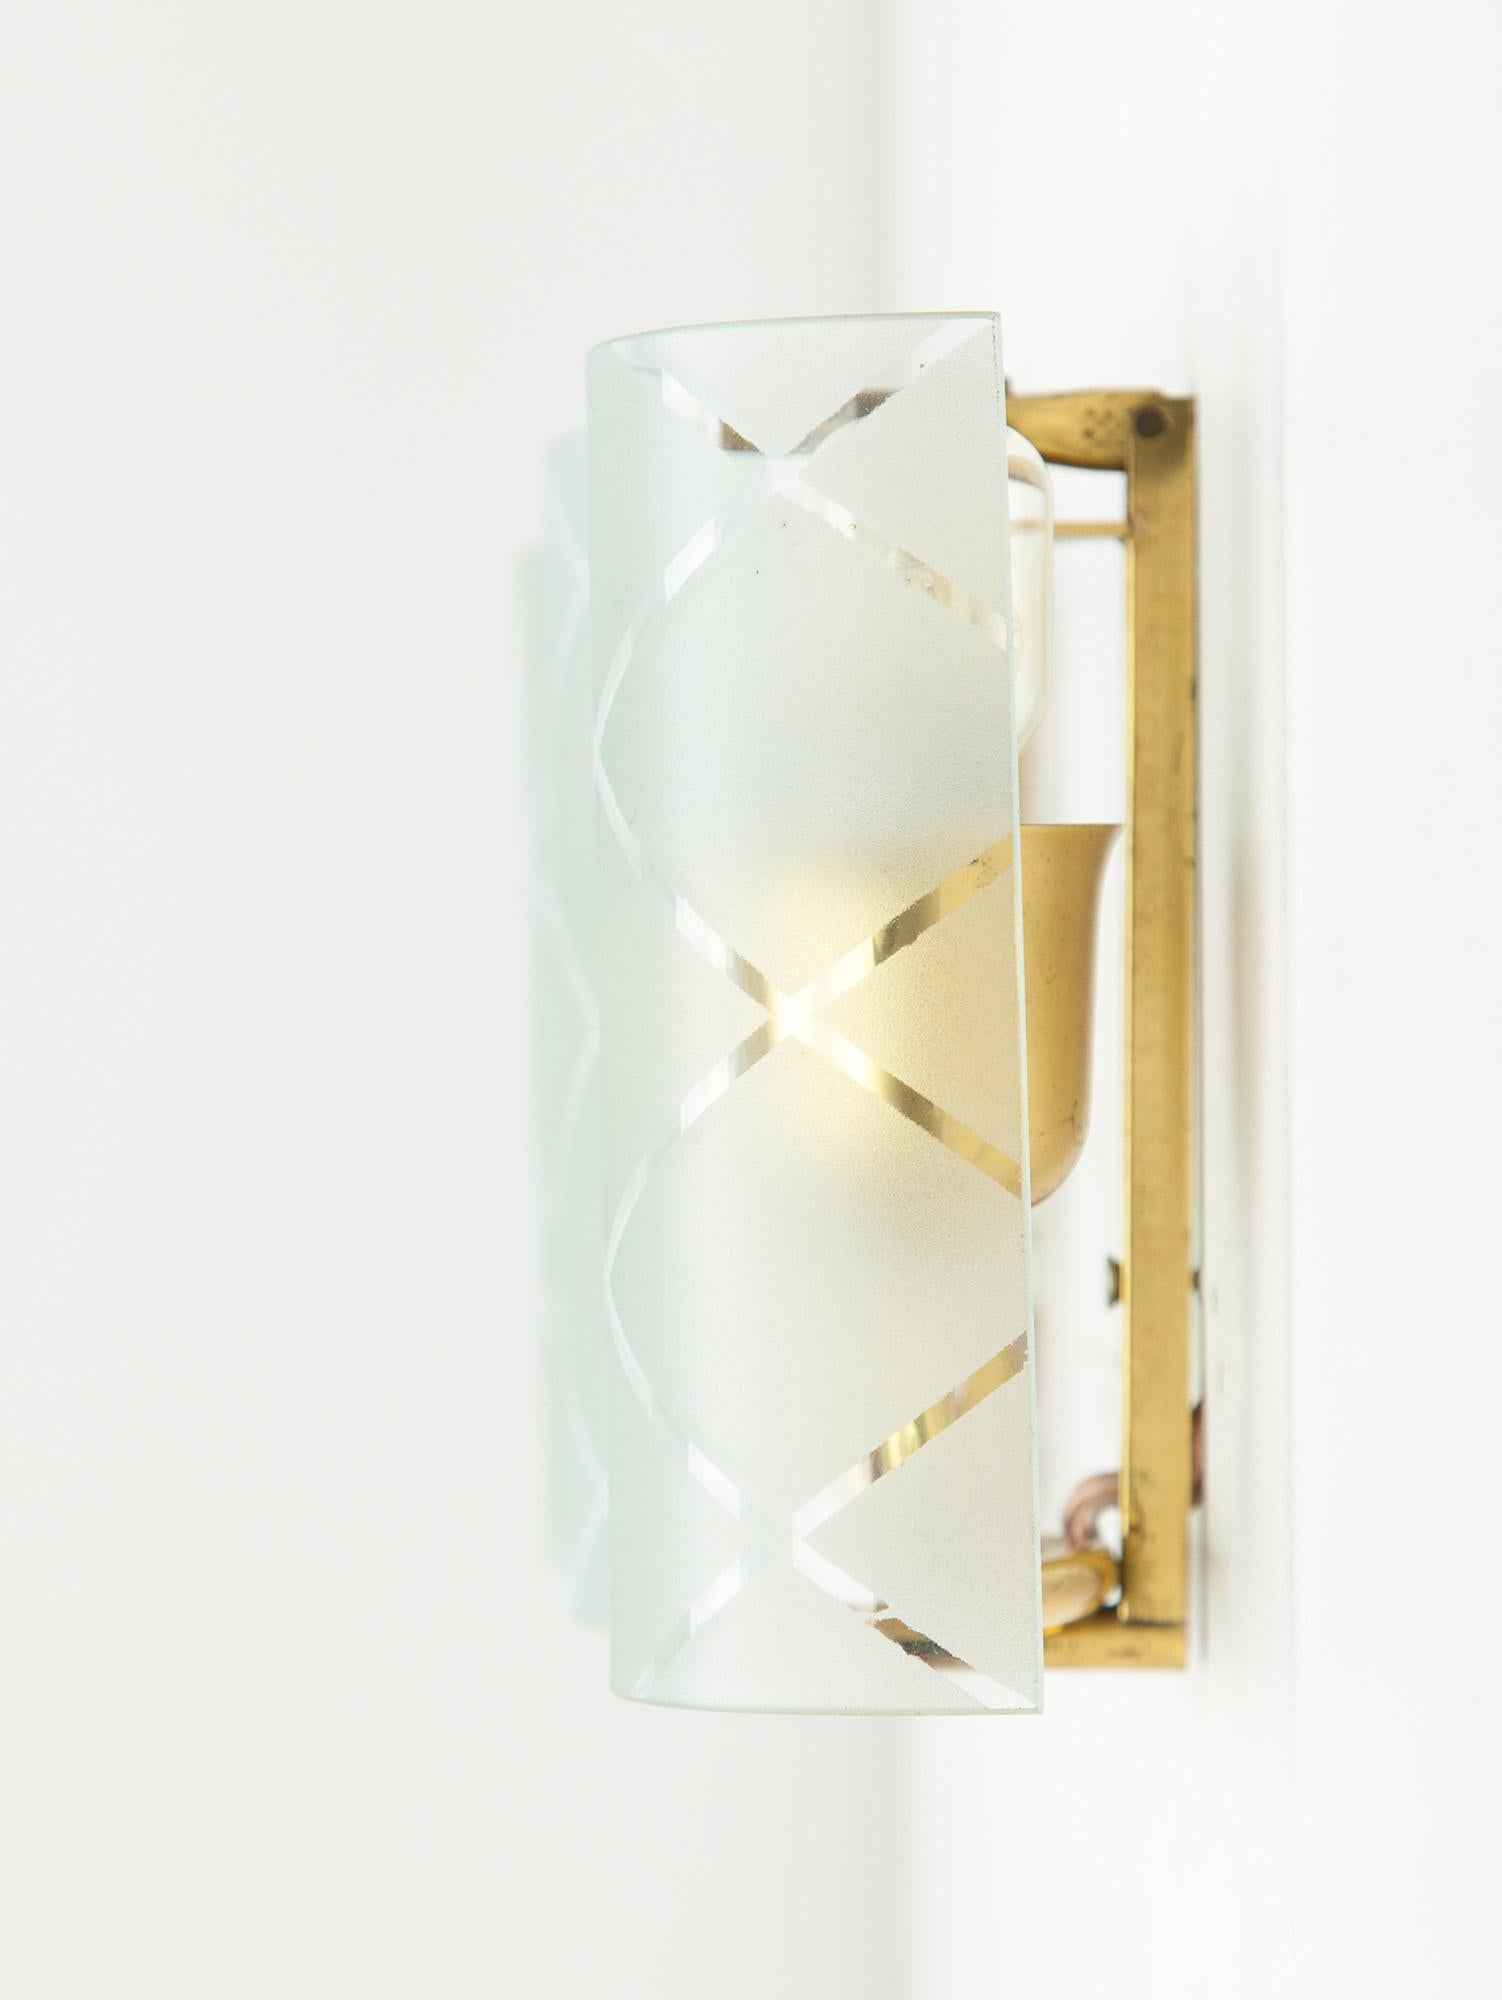 Italian Etched Glass & Brass Rectangular Wall Lights, 1950s  For Sale 1